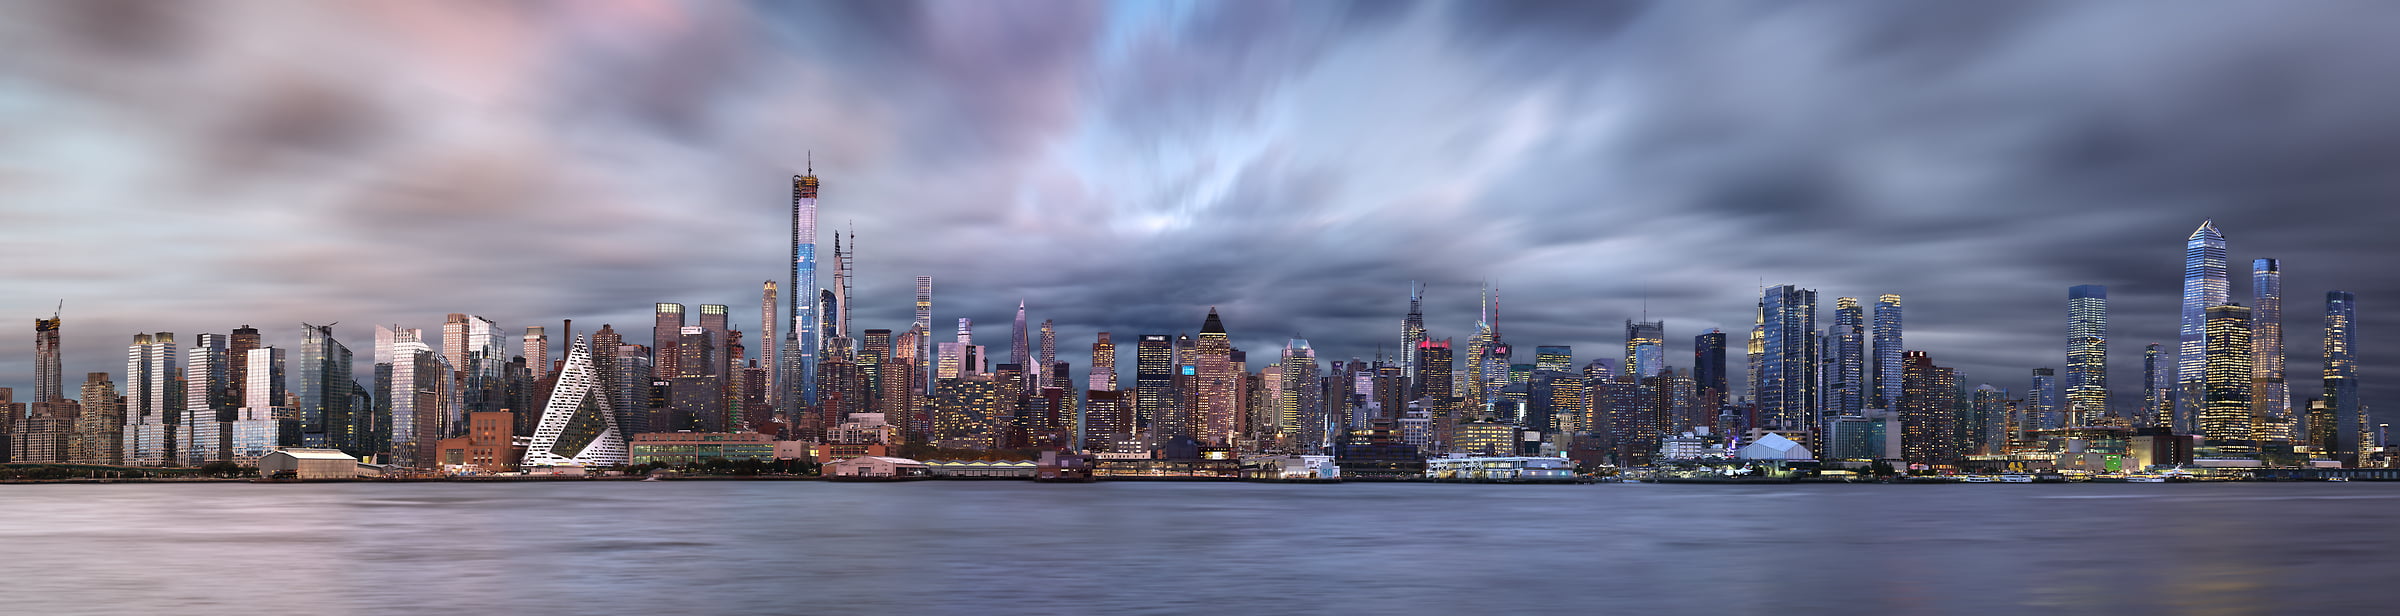 1,160 megapixels! A very high resolution, large-format VAST photo print of the New York City skyline that can be used as a wallpaper; photograph created by Phil Crawshay in Weehawken, New Jersey.